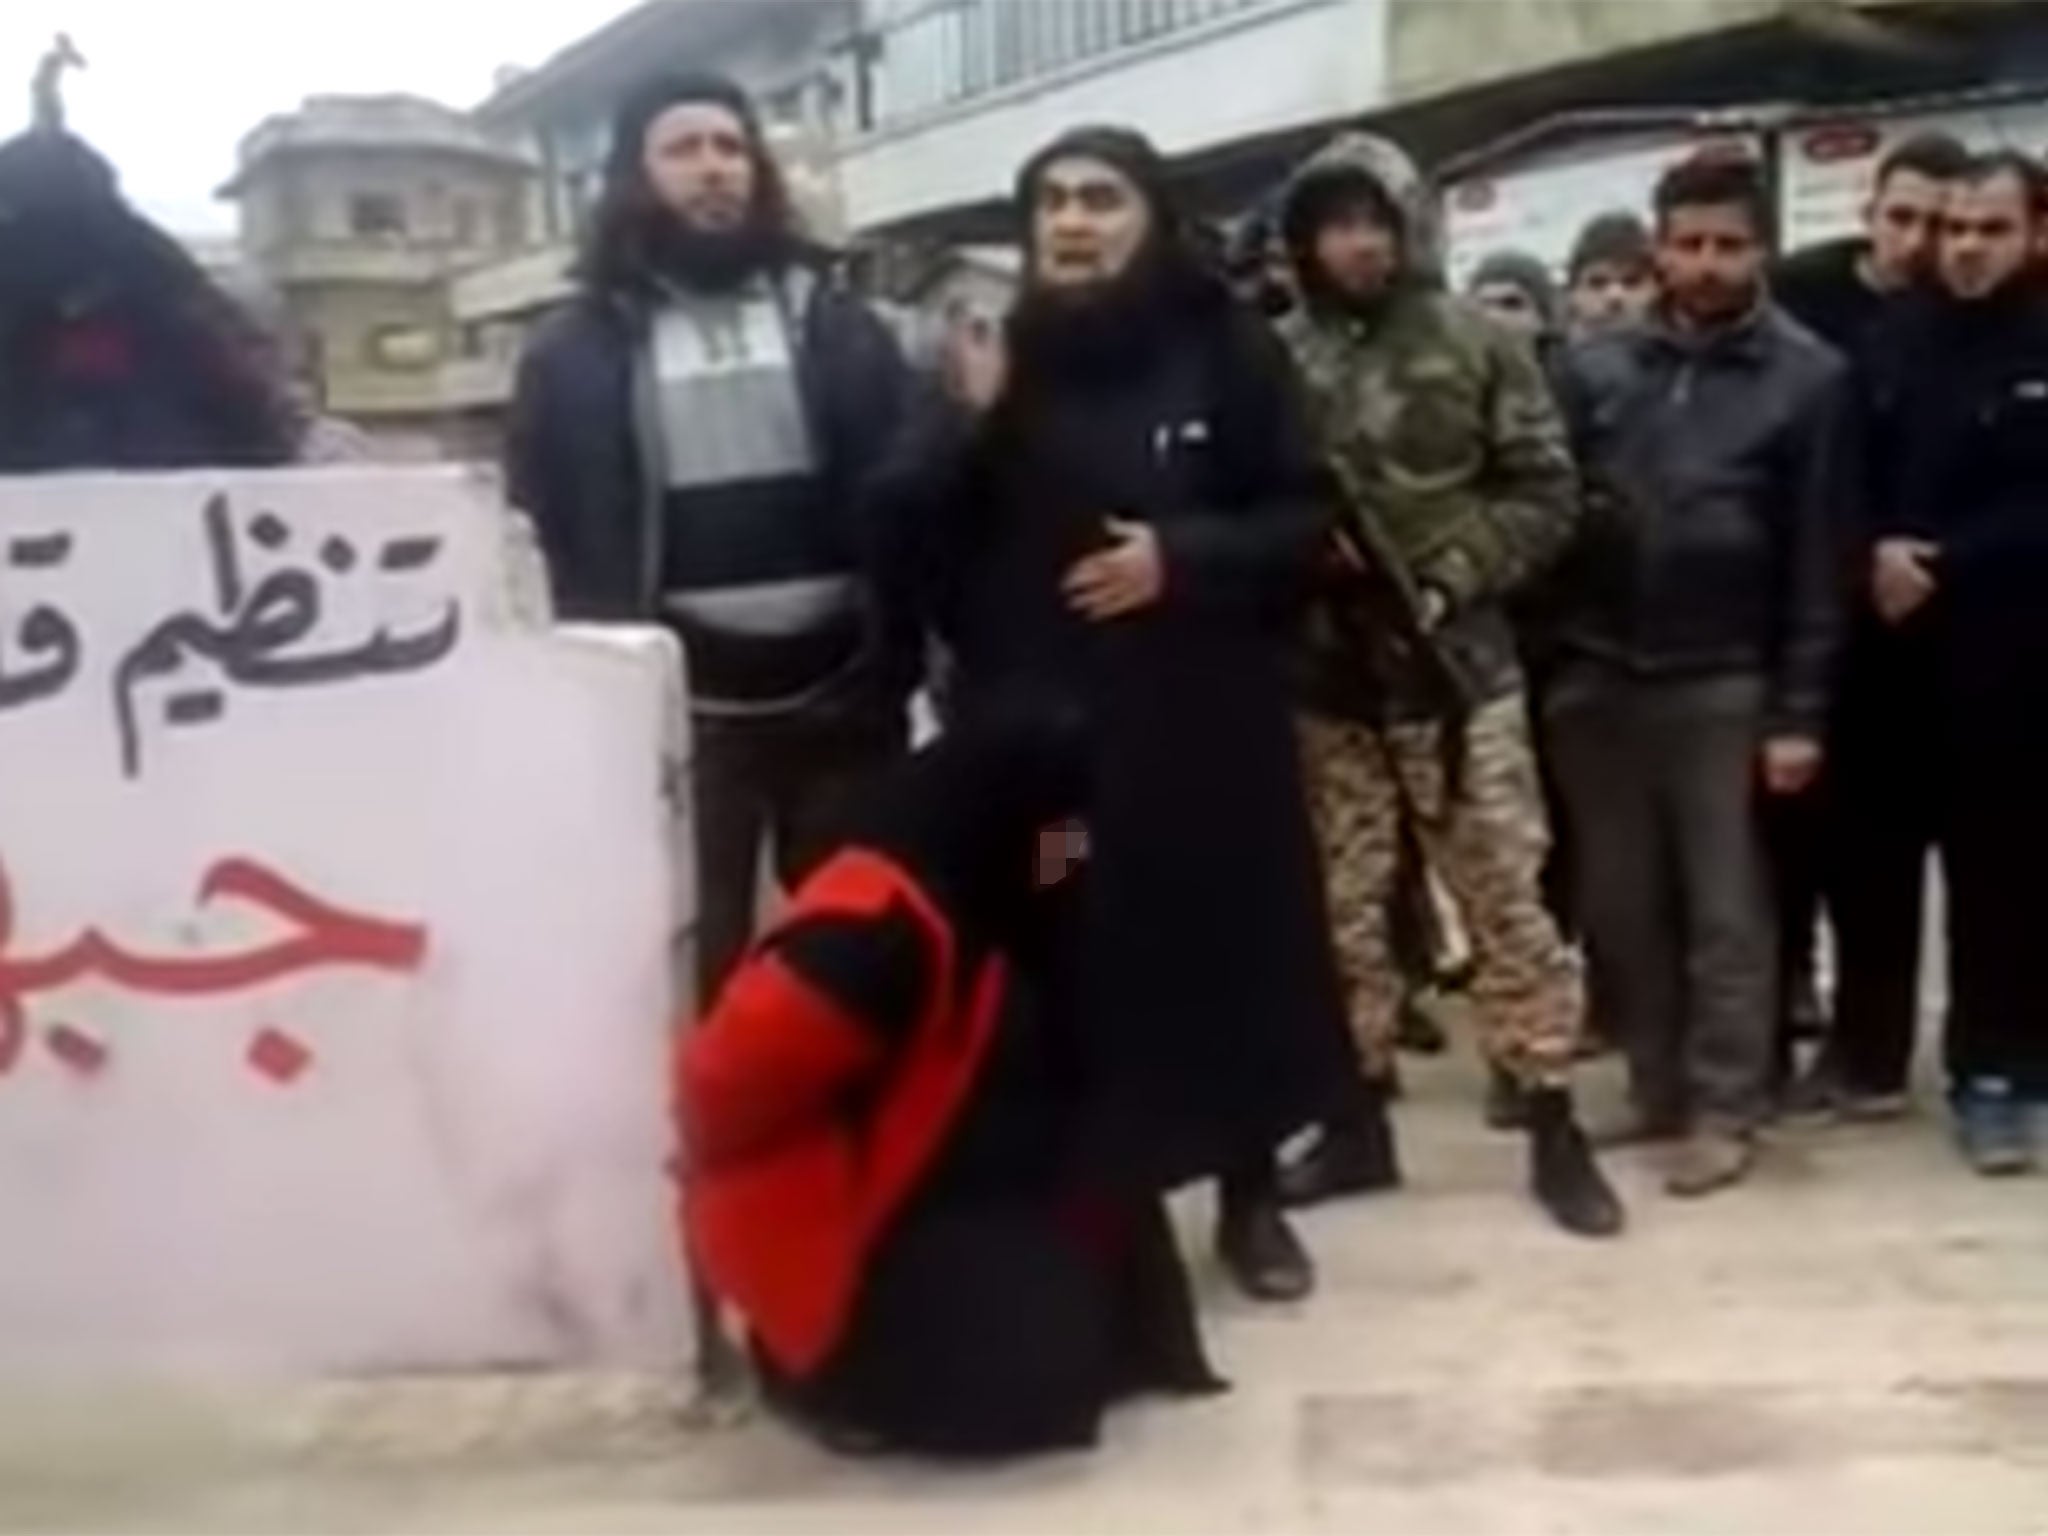 The shocking video shows a woman being executed after al-Qaeda militants claim she committed adultery